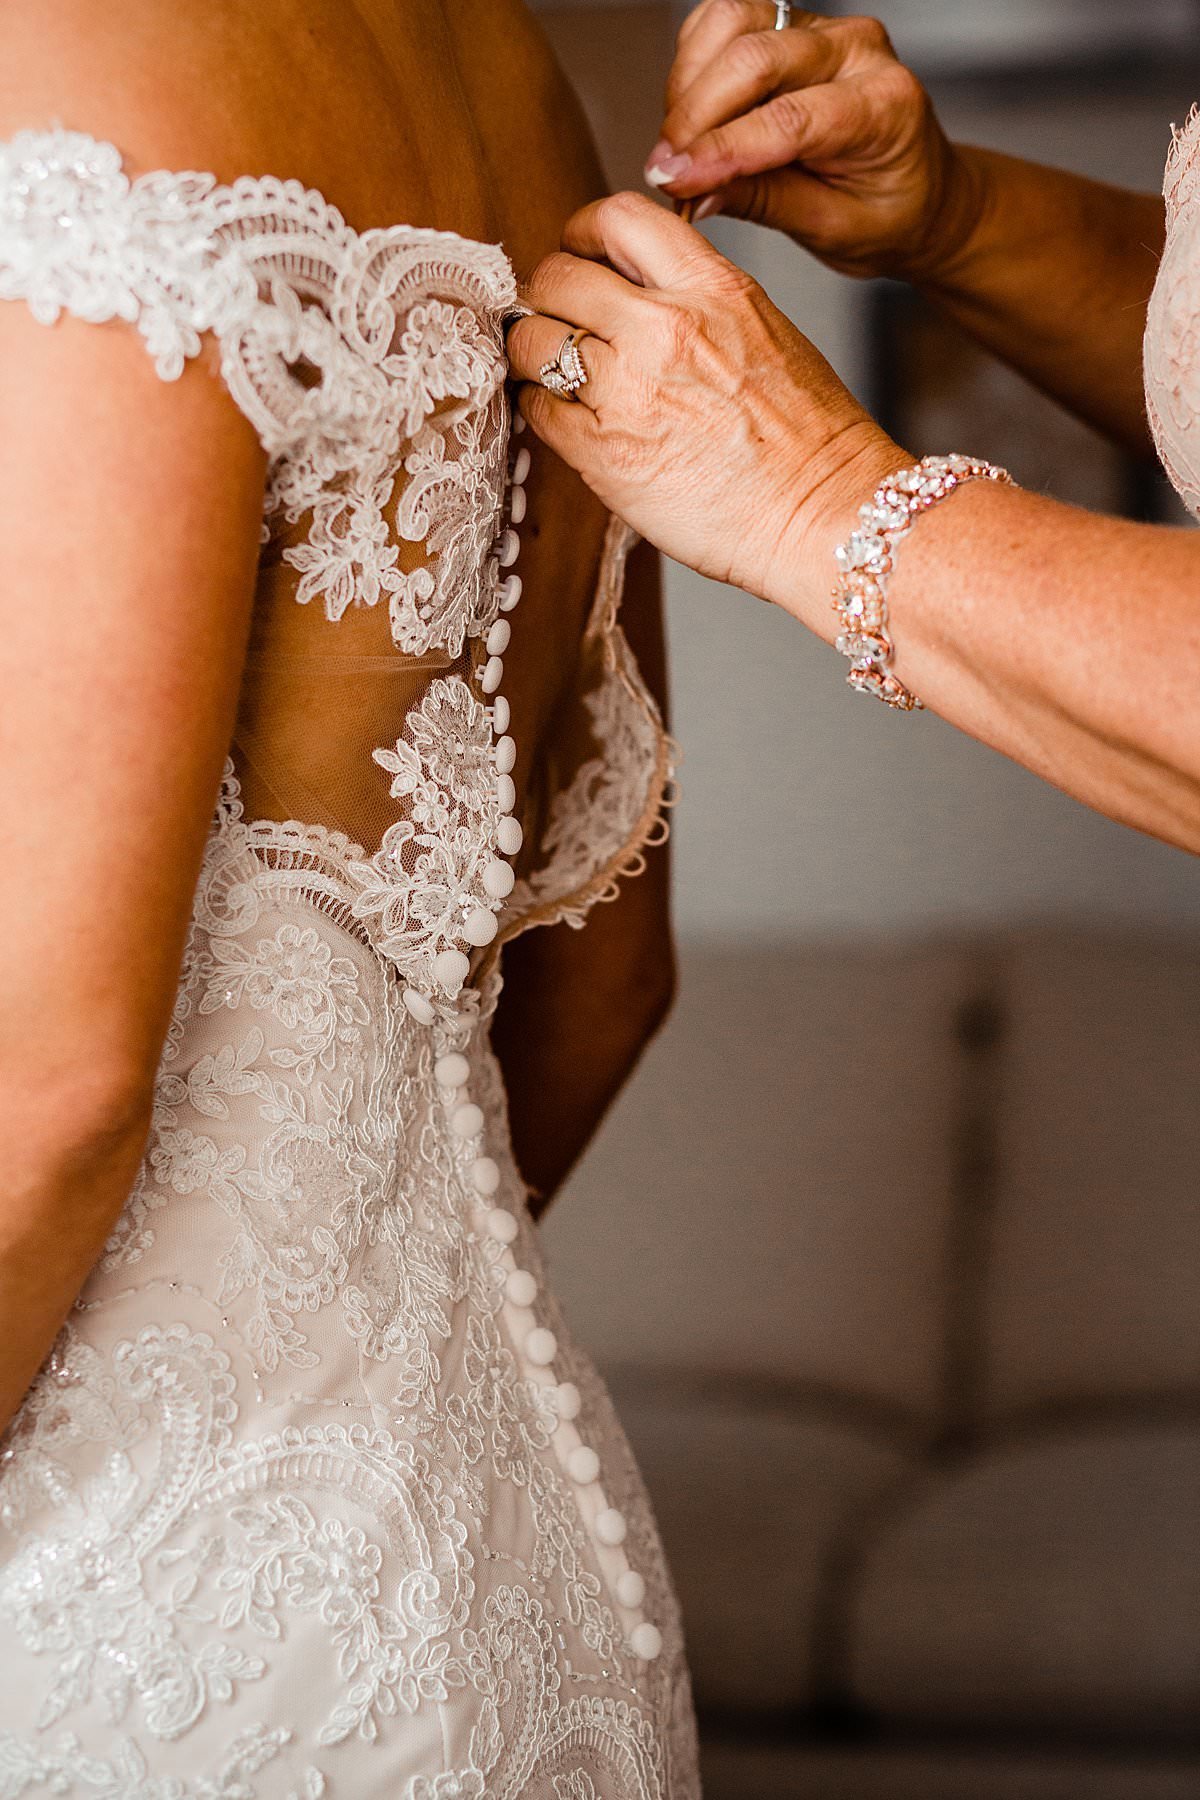 Close up photo of mom buttoning her daughters wedding dress